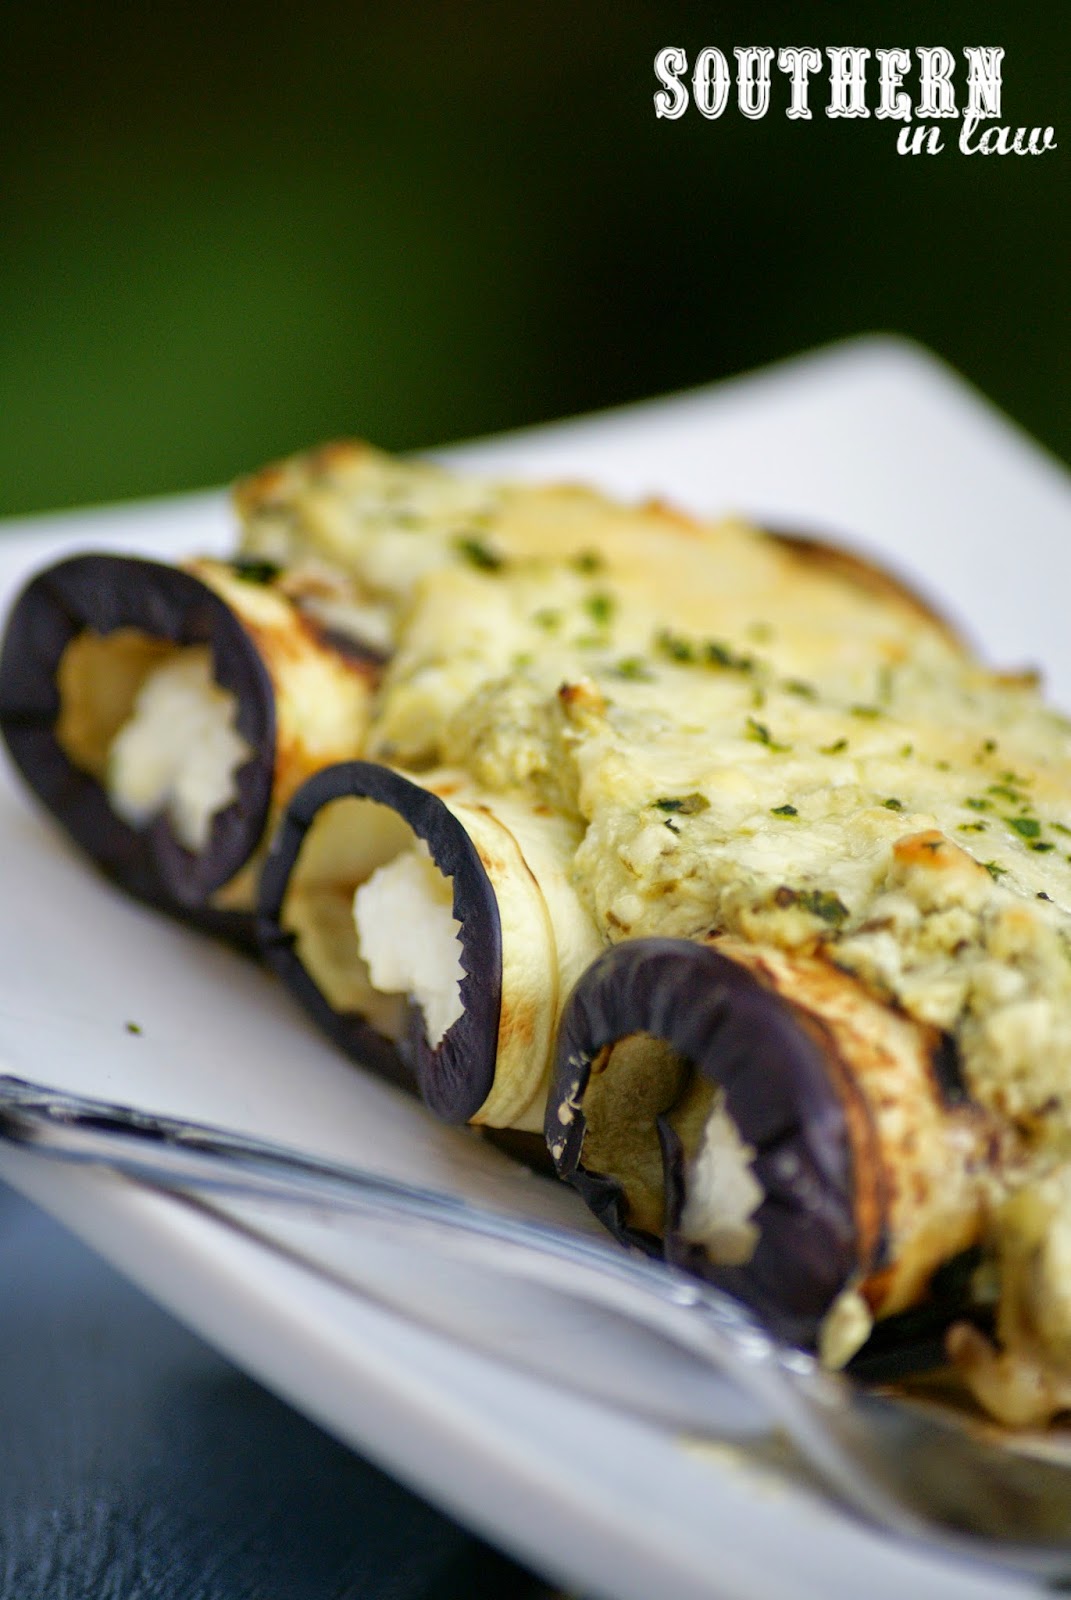 Low Fat Eggplant Involtini Recipe with Ricotta and Pesto - healthy, low fat, low carb, gluten free, egg free